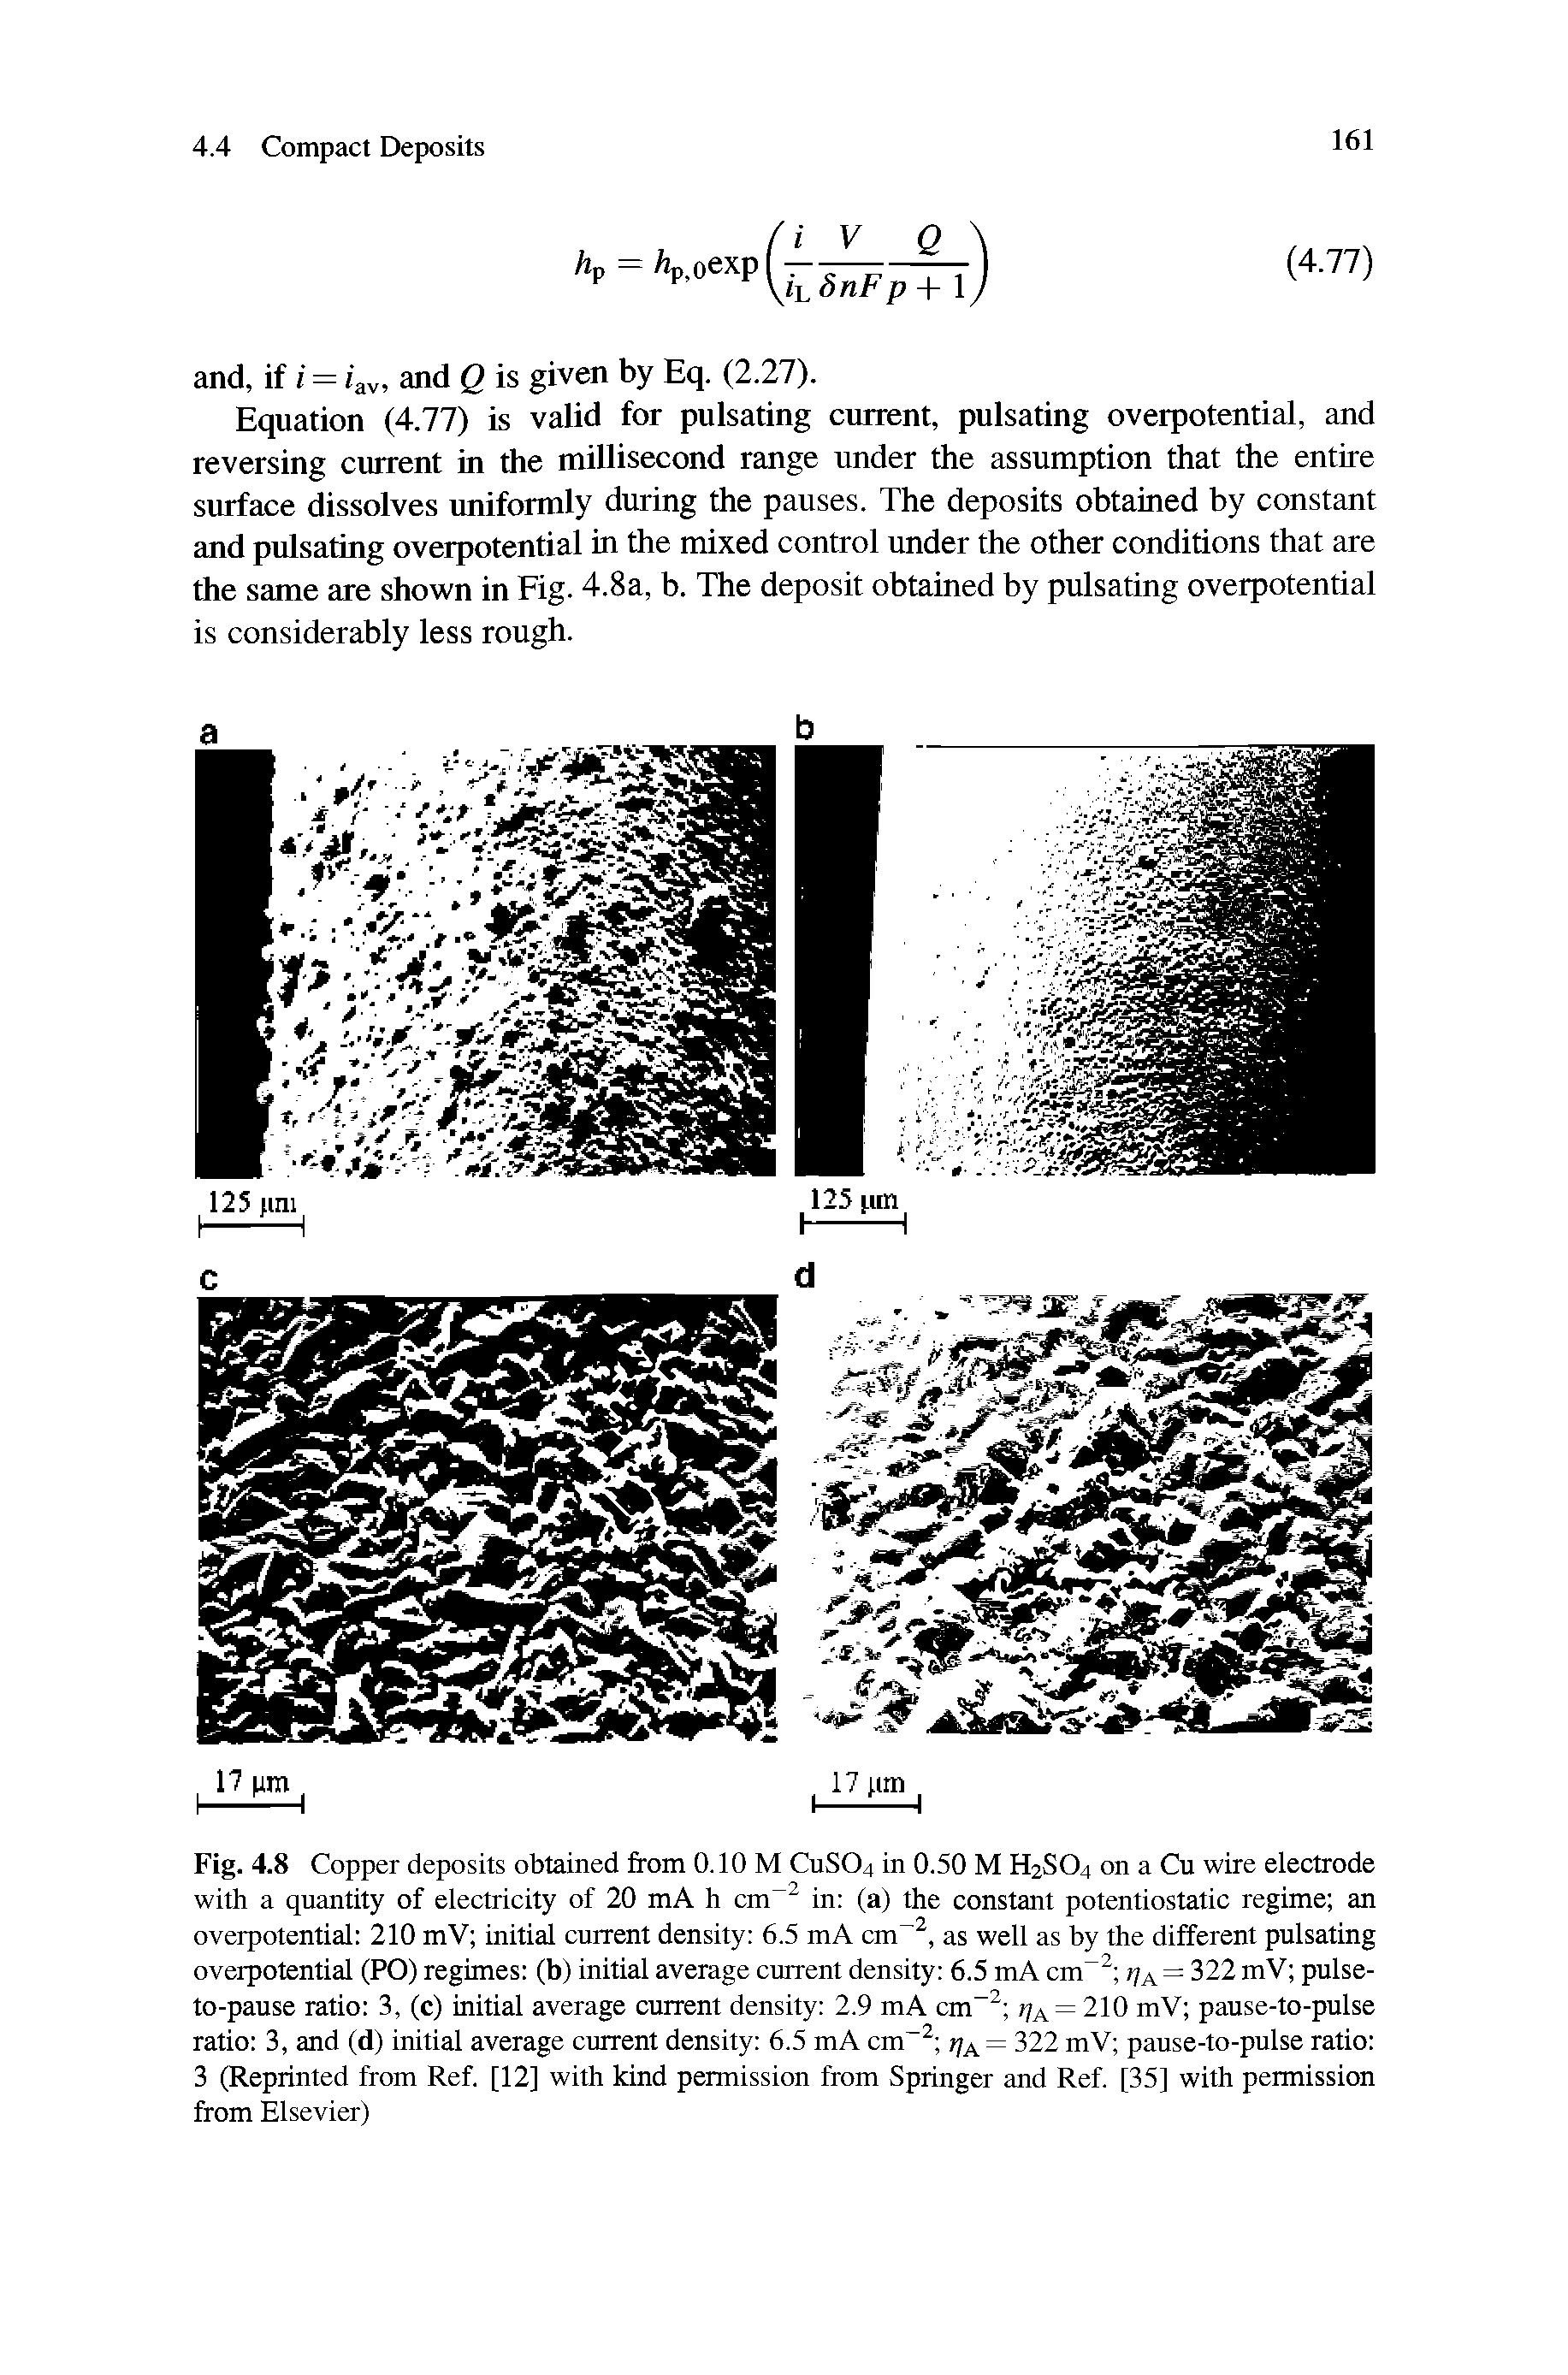 Fig. 4.8 Copper deposits obtained from 0.10 M CUSO4 in 0.50 M H2SO4 on a Cu wire electrode with a quantity of electricity of 20 mA h cm in (a) the constant potentiostatic regime an overpotential 210 mV initial current density 6.5 mA cm , as well as by the different pulsating overpotential (PO) regimes (b) initial average current density 6.5 mA cm = 322 mV pulse-...